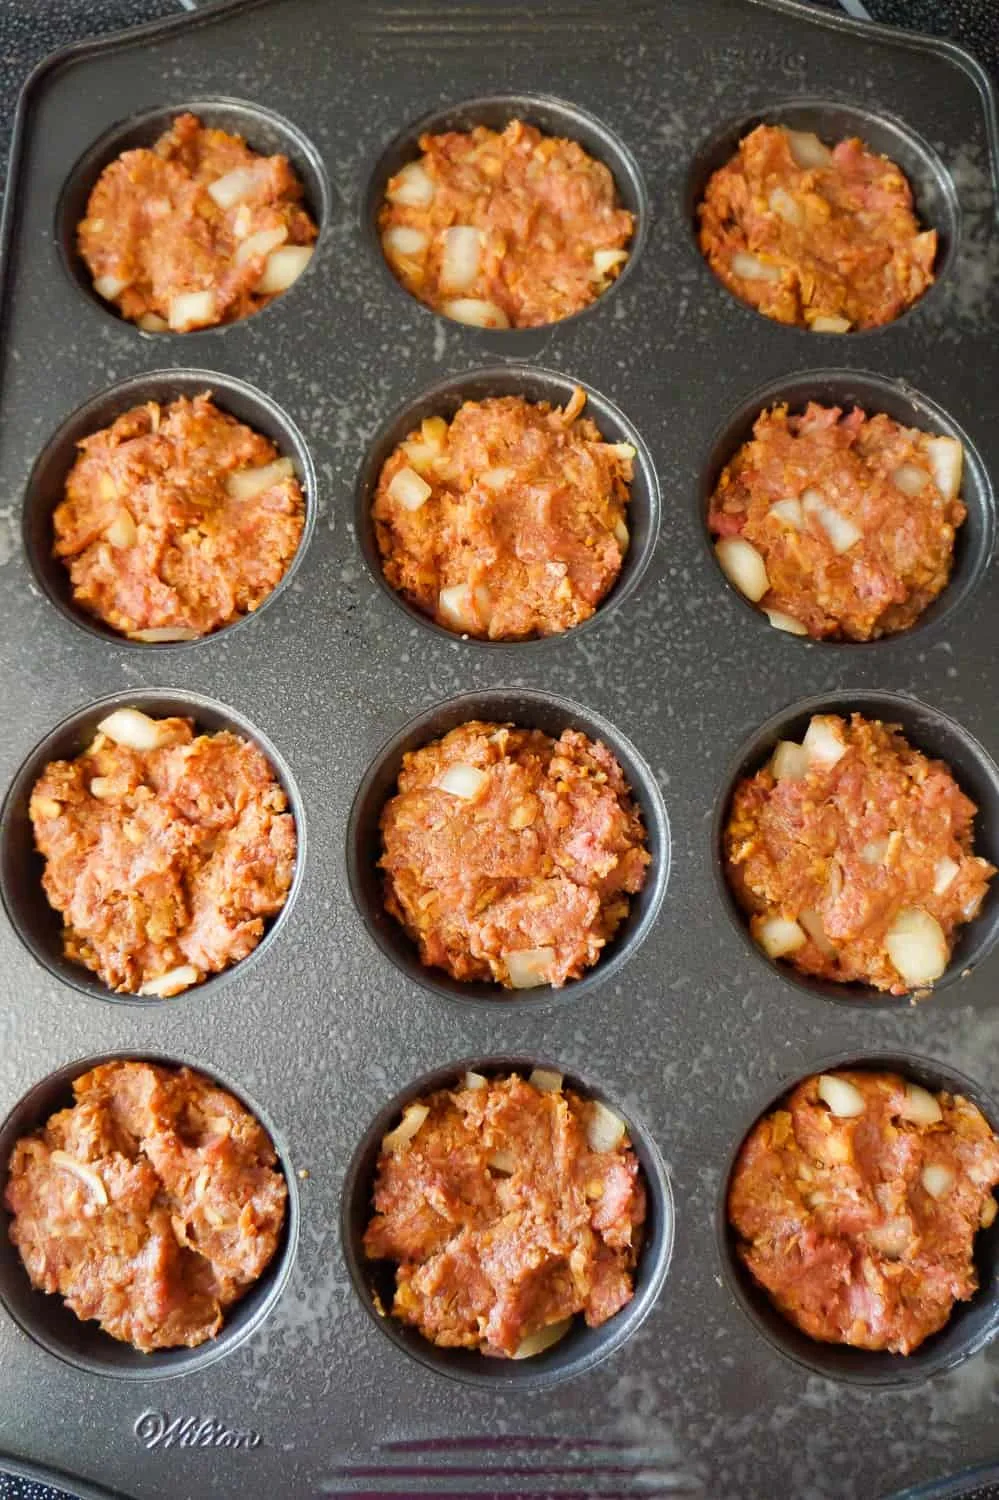 meatloaf mixture pressed into muffin tins